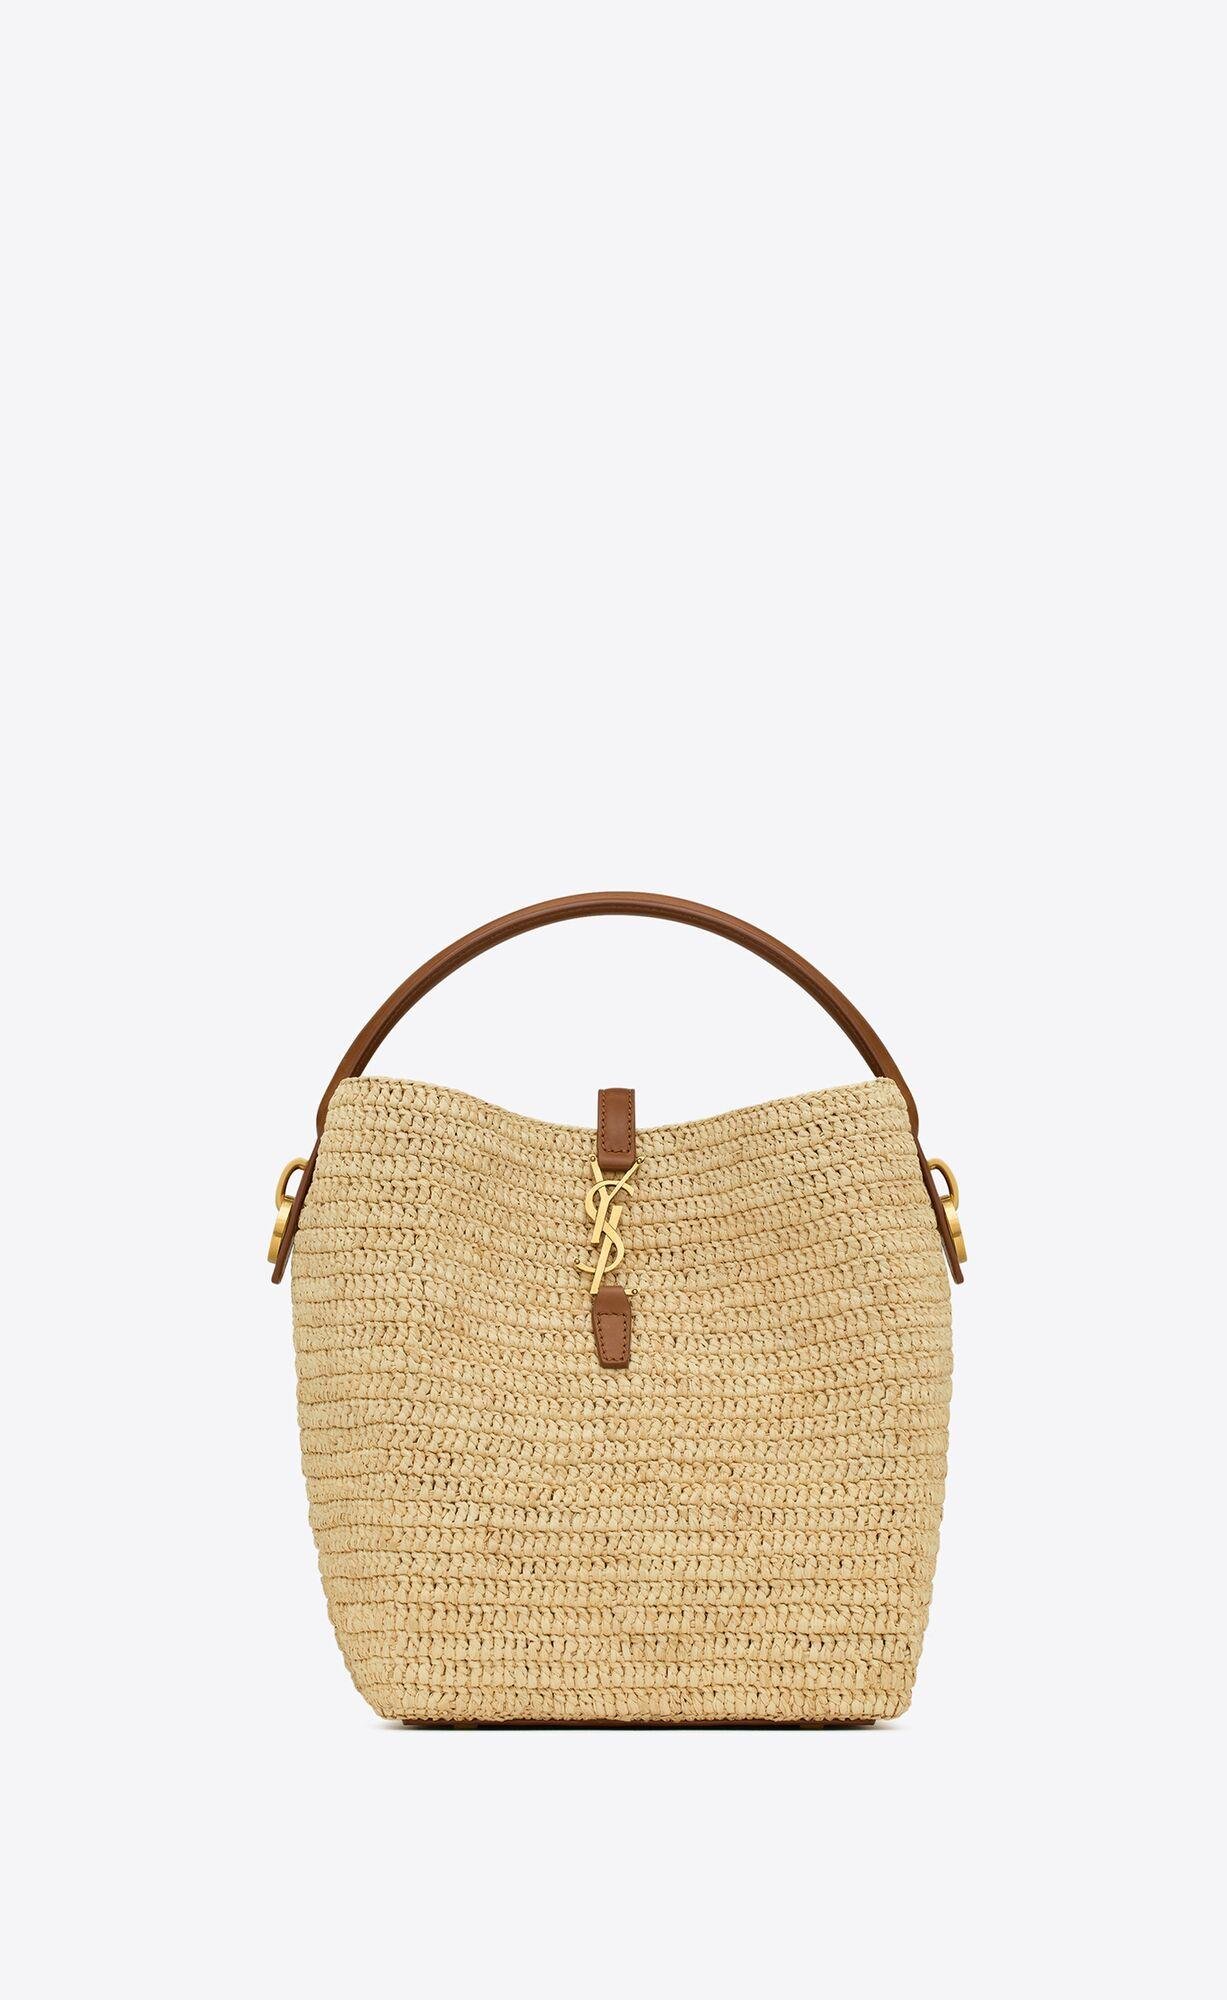 le 37 in woven raffia and vegetable-tanned leather by SAINT LAURENT